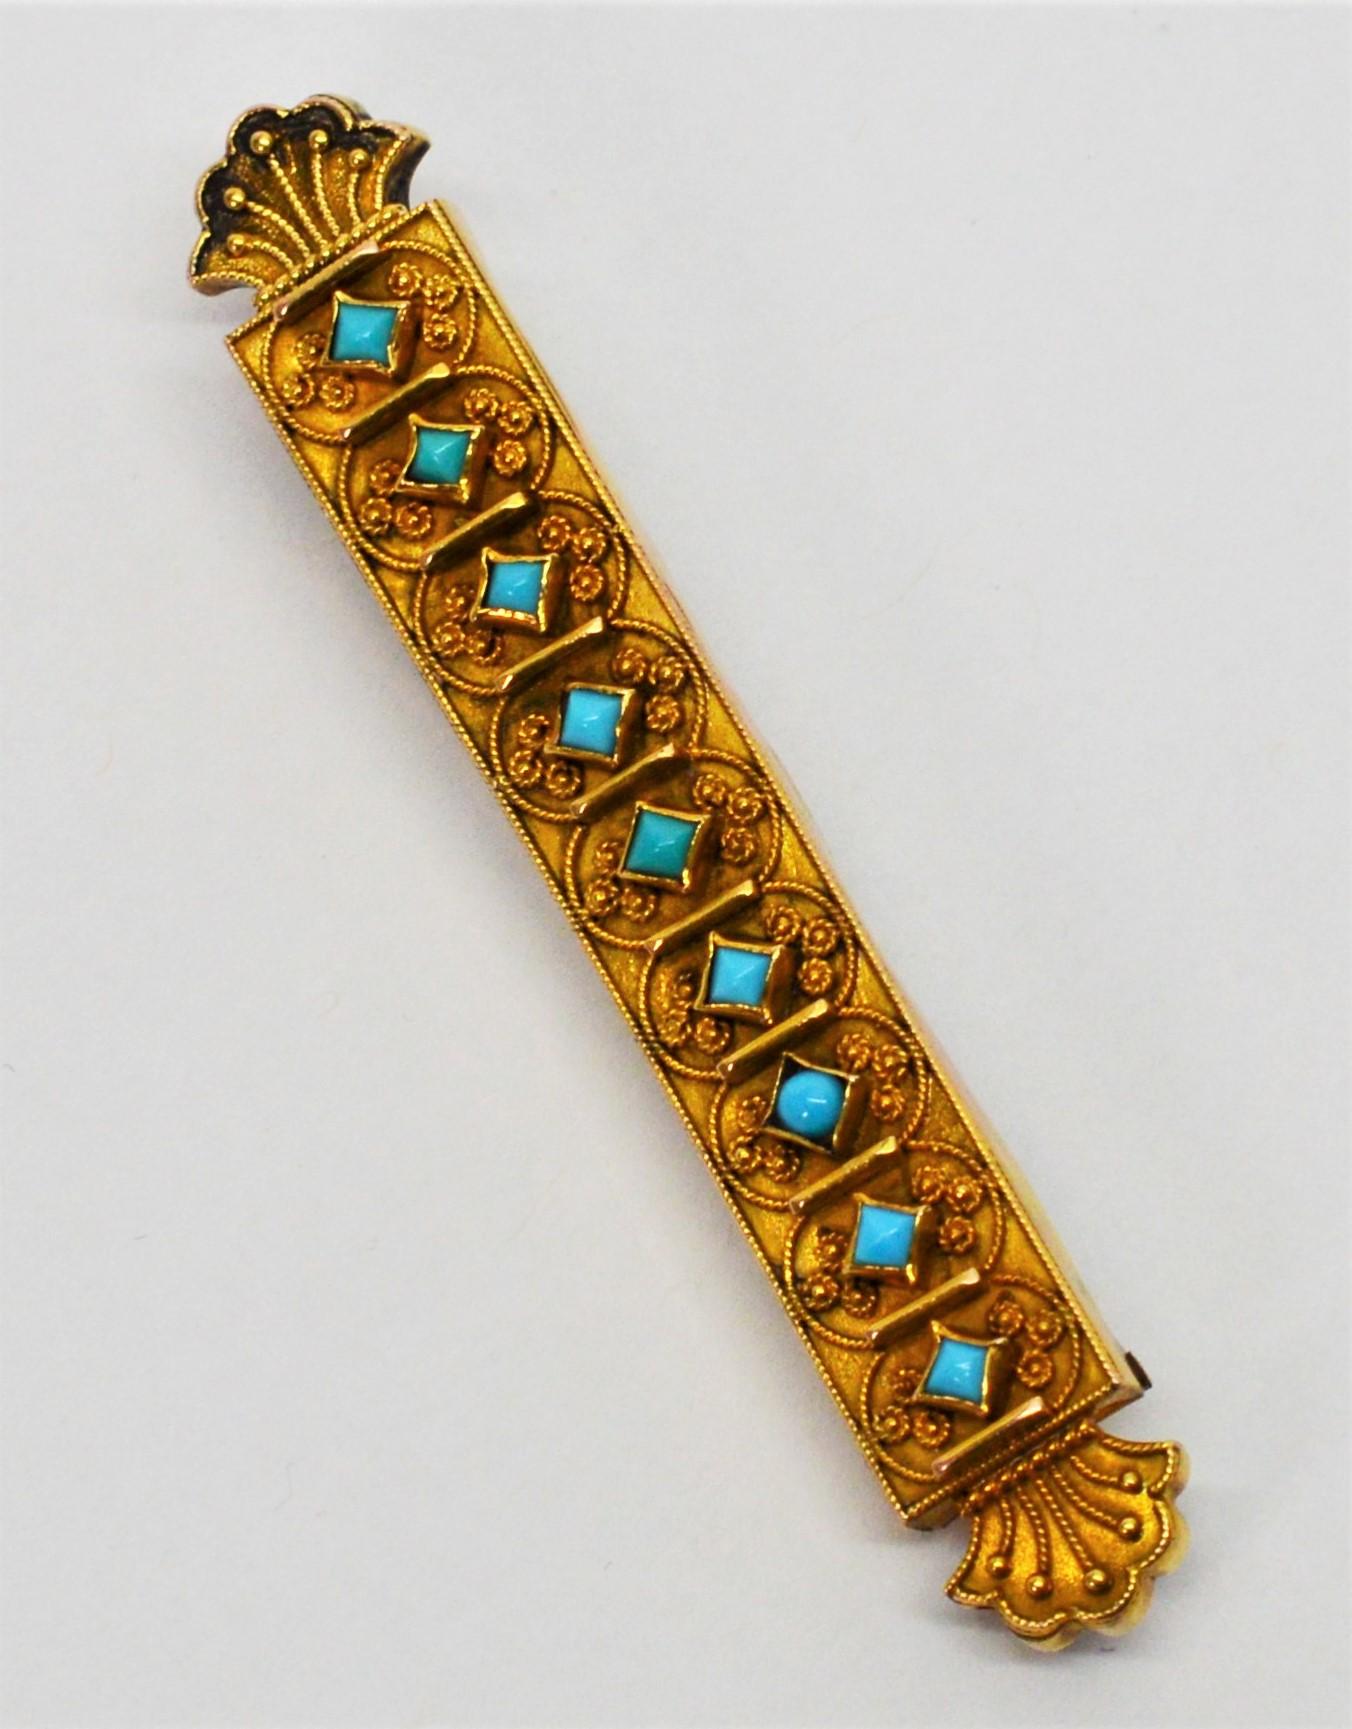 Art Deco style, this ten carat antique yellow gold bar pin is accented with bezel set natural turquoise stones in patterned filigree. The 2-3/8 inch pin has decorative scroll ends and is secure with a rollover closure. The piece also is outfitted